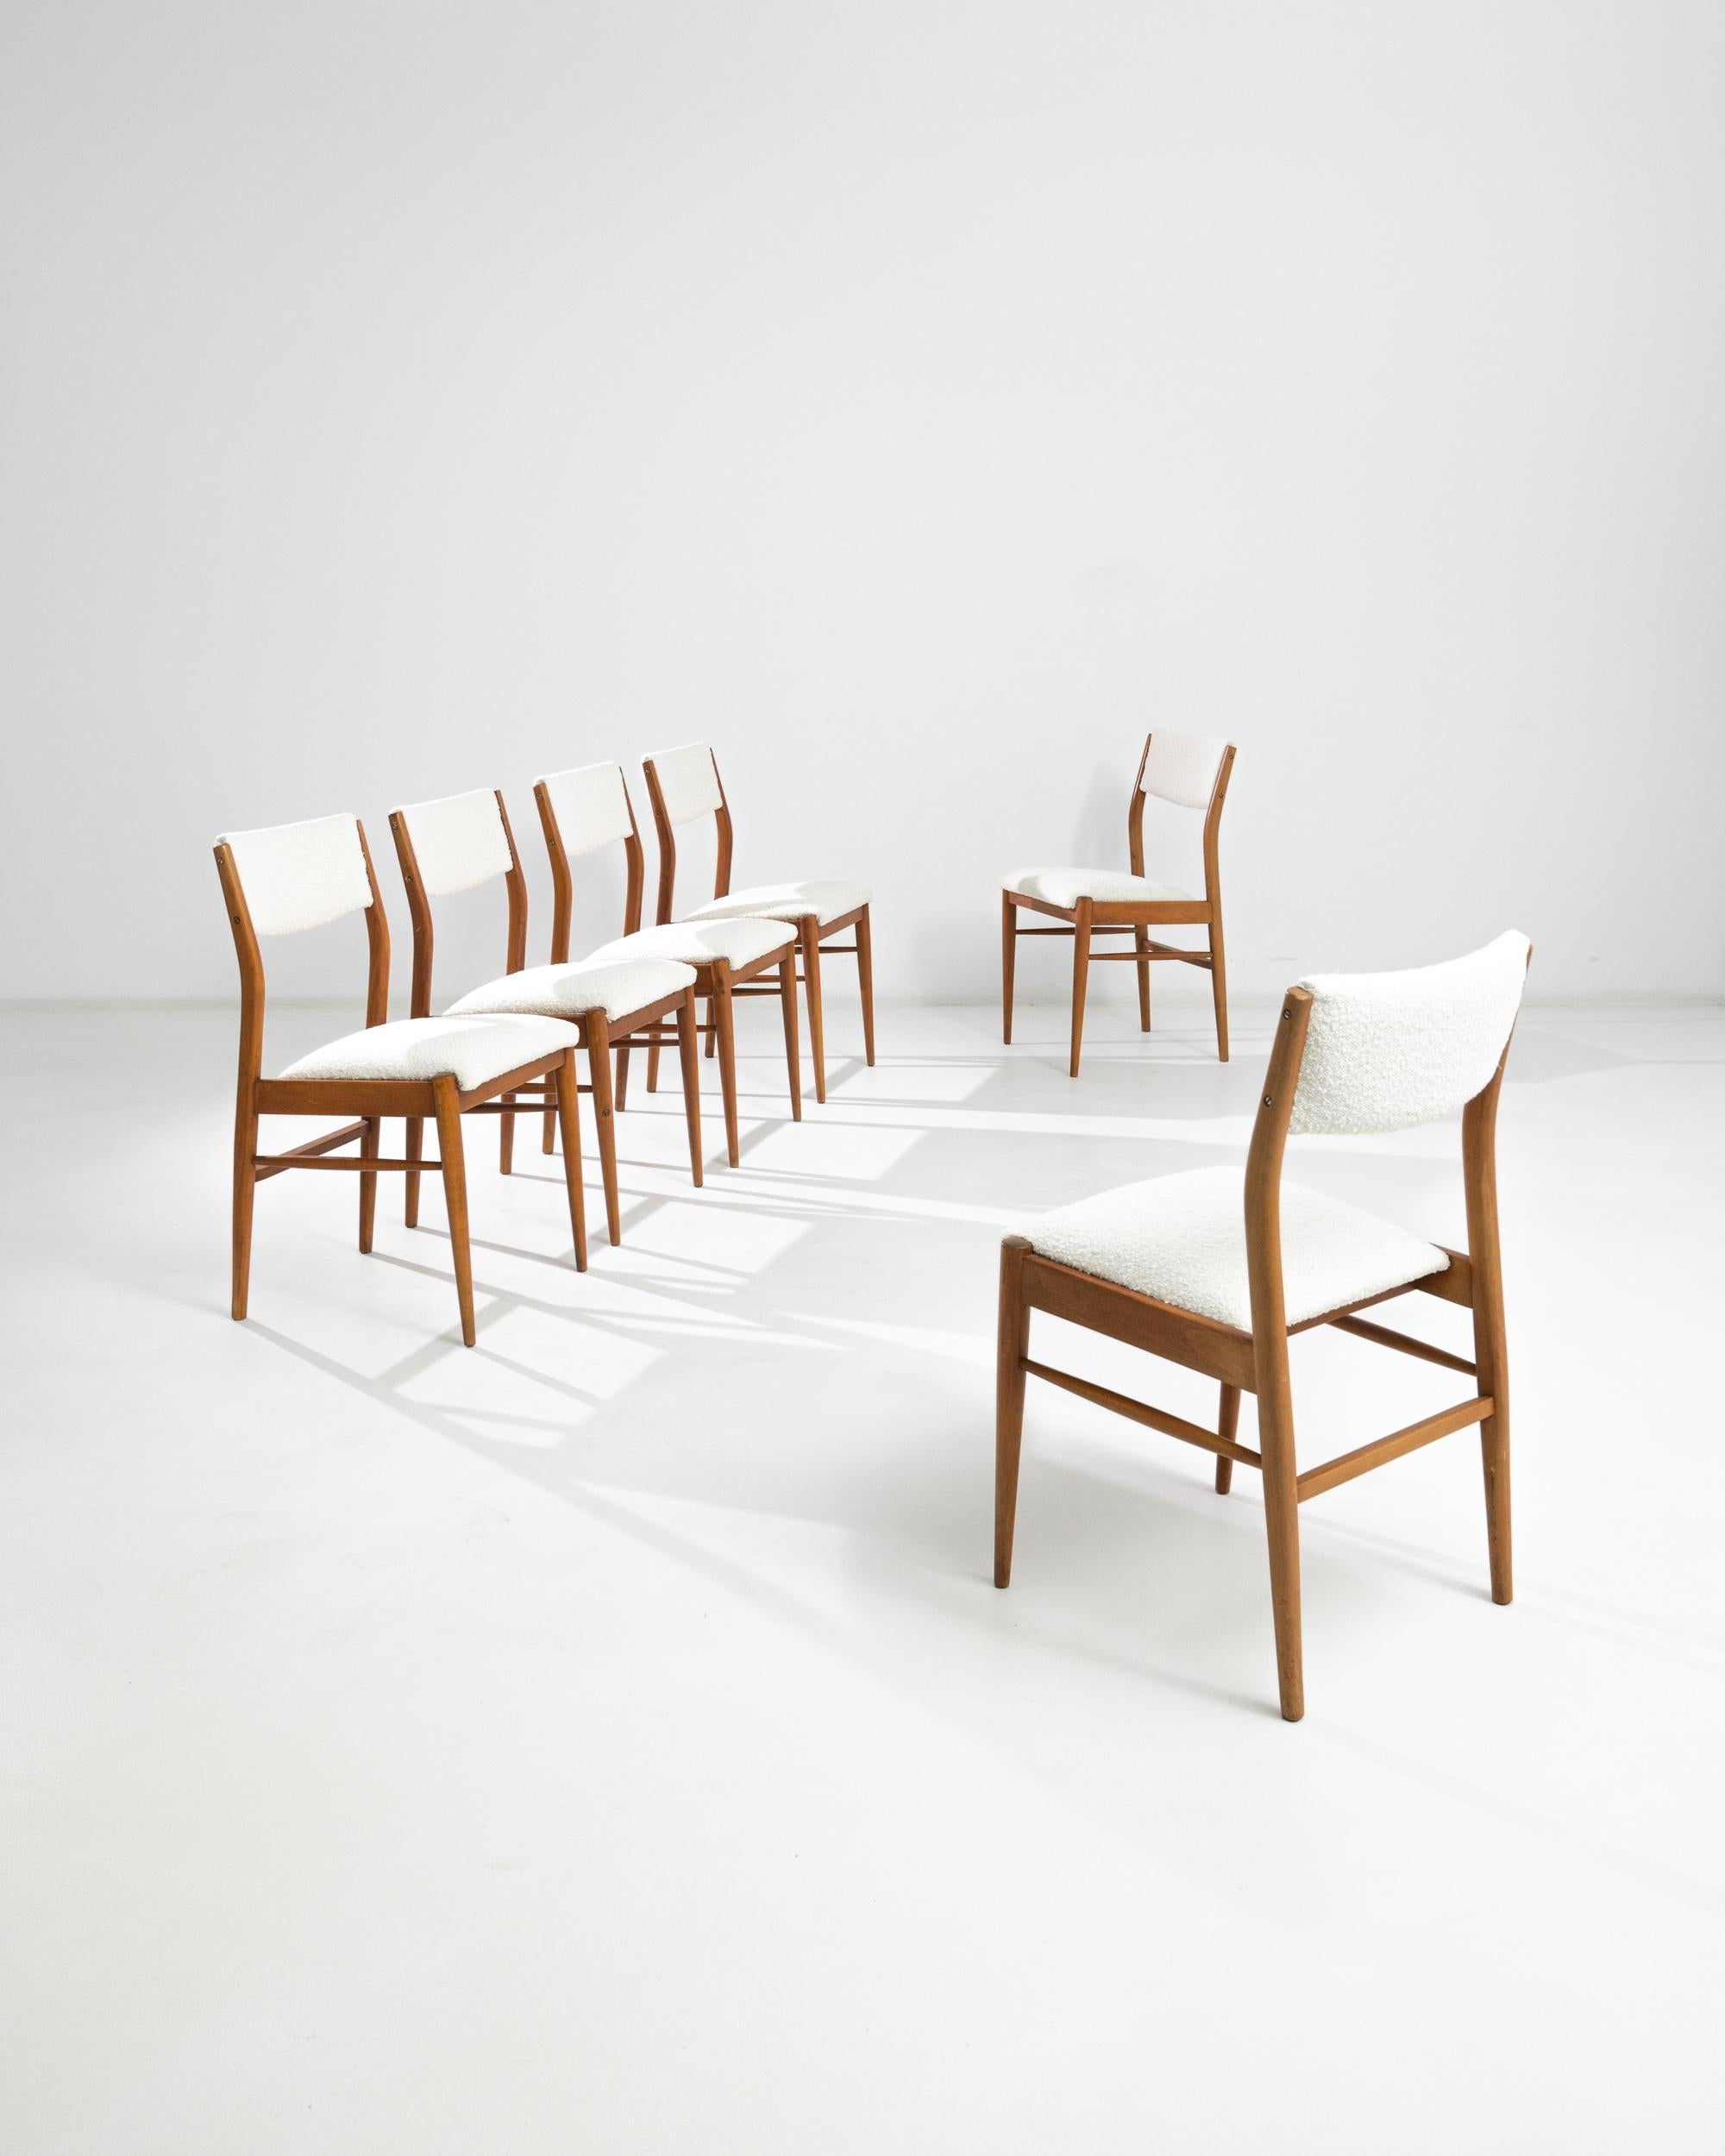 A set of six dining chairs made in Scandinavia, featuring large upholstered backrests, upholstered seats and tapered legs connected by side stretchers. The slightly angled backrest allows for a comfortable posture, enhanced by the fluffy powder